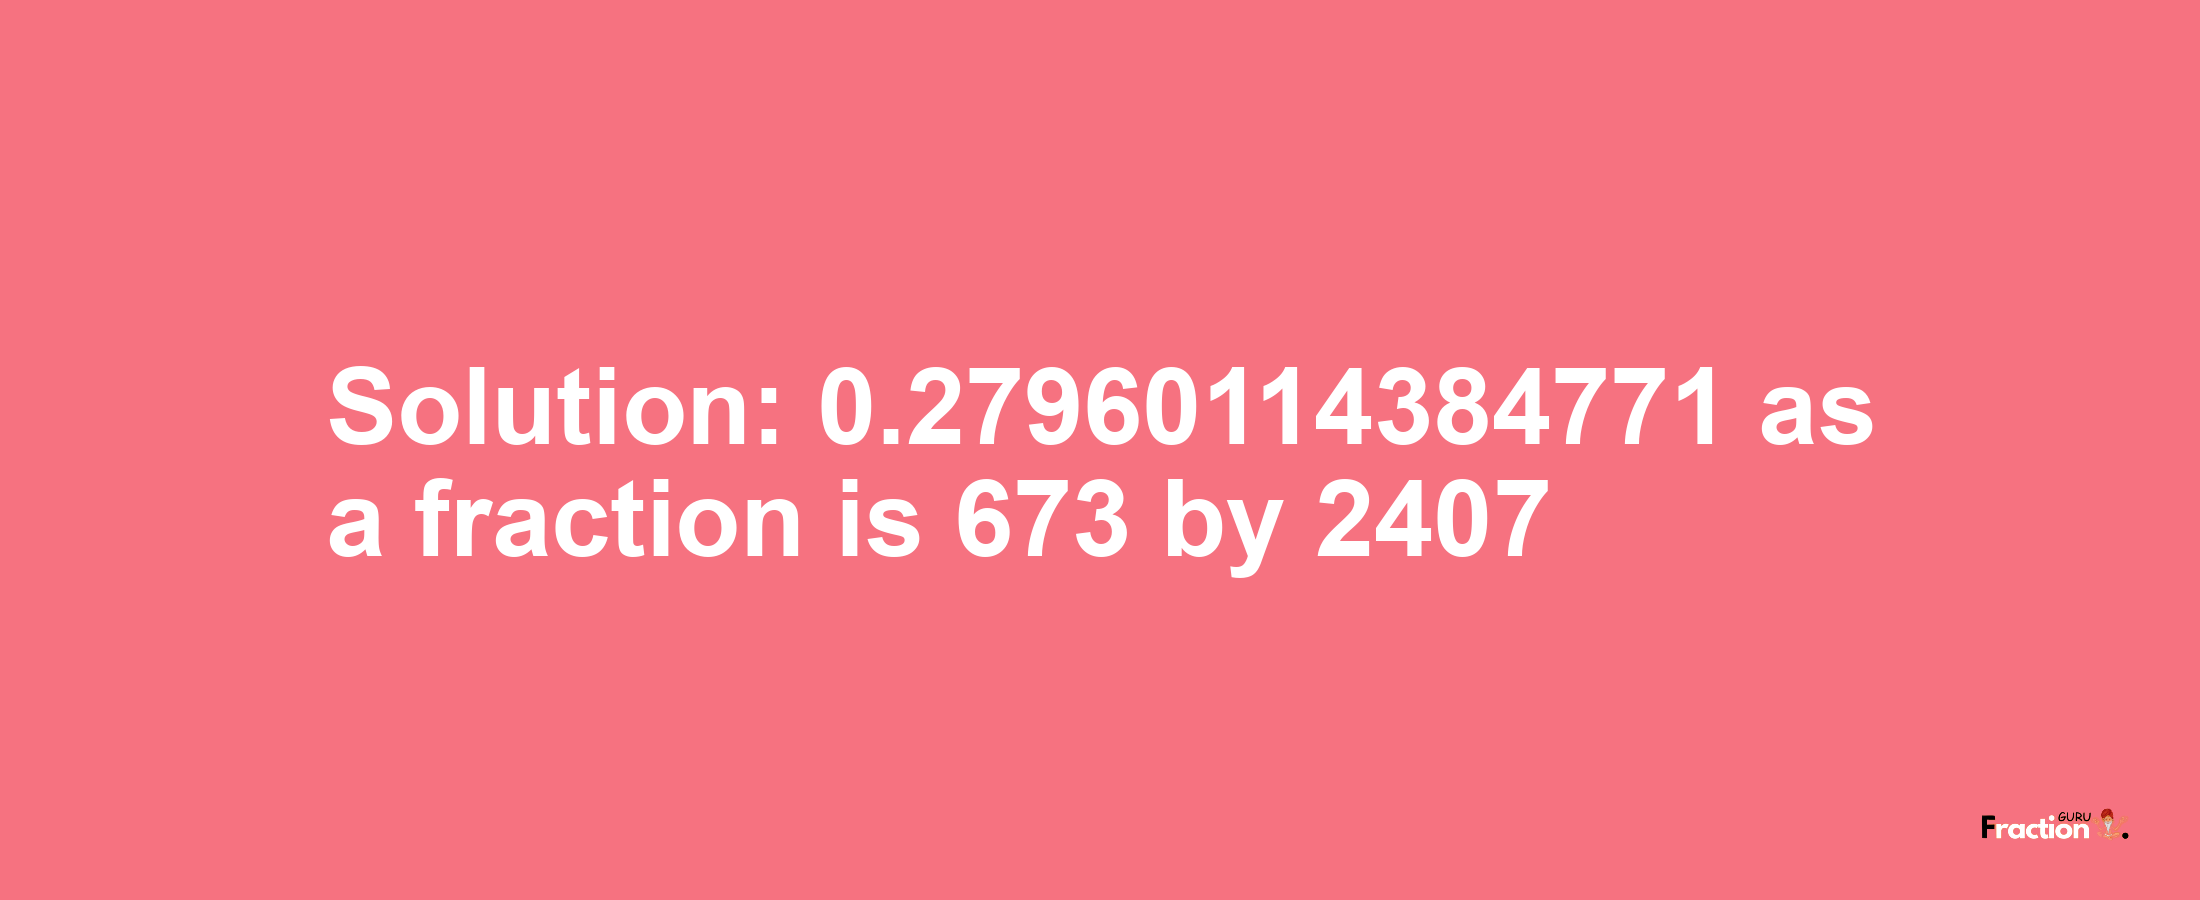 Solution:0.27960114384771 as a fraction is 673/2407